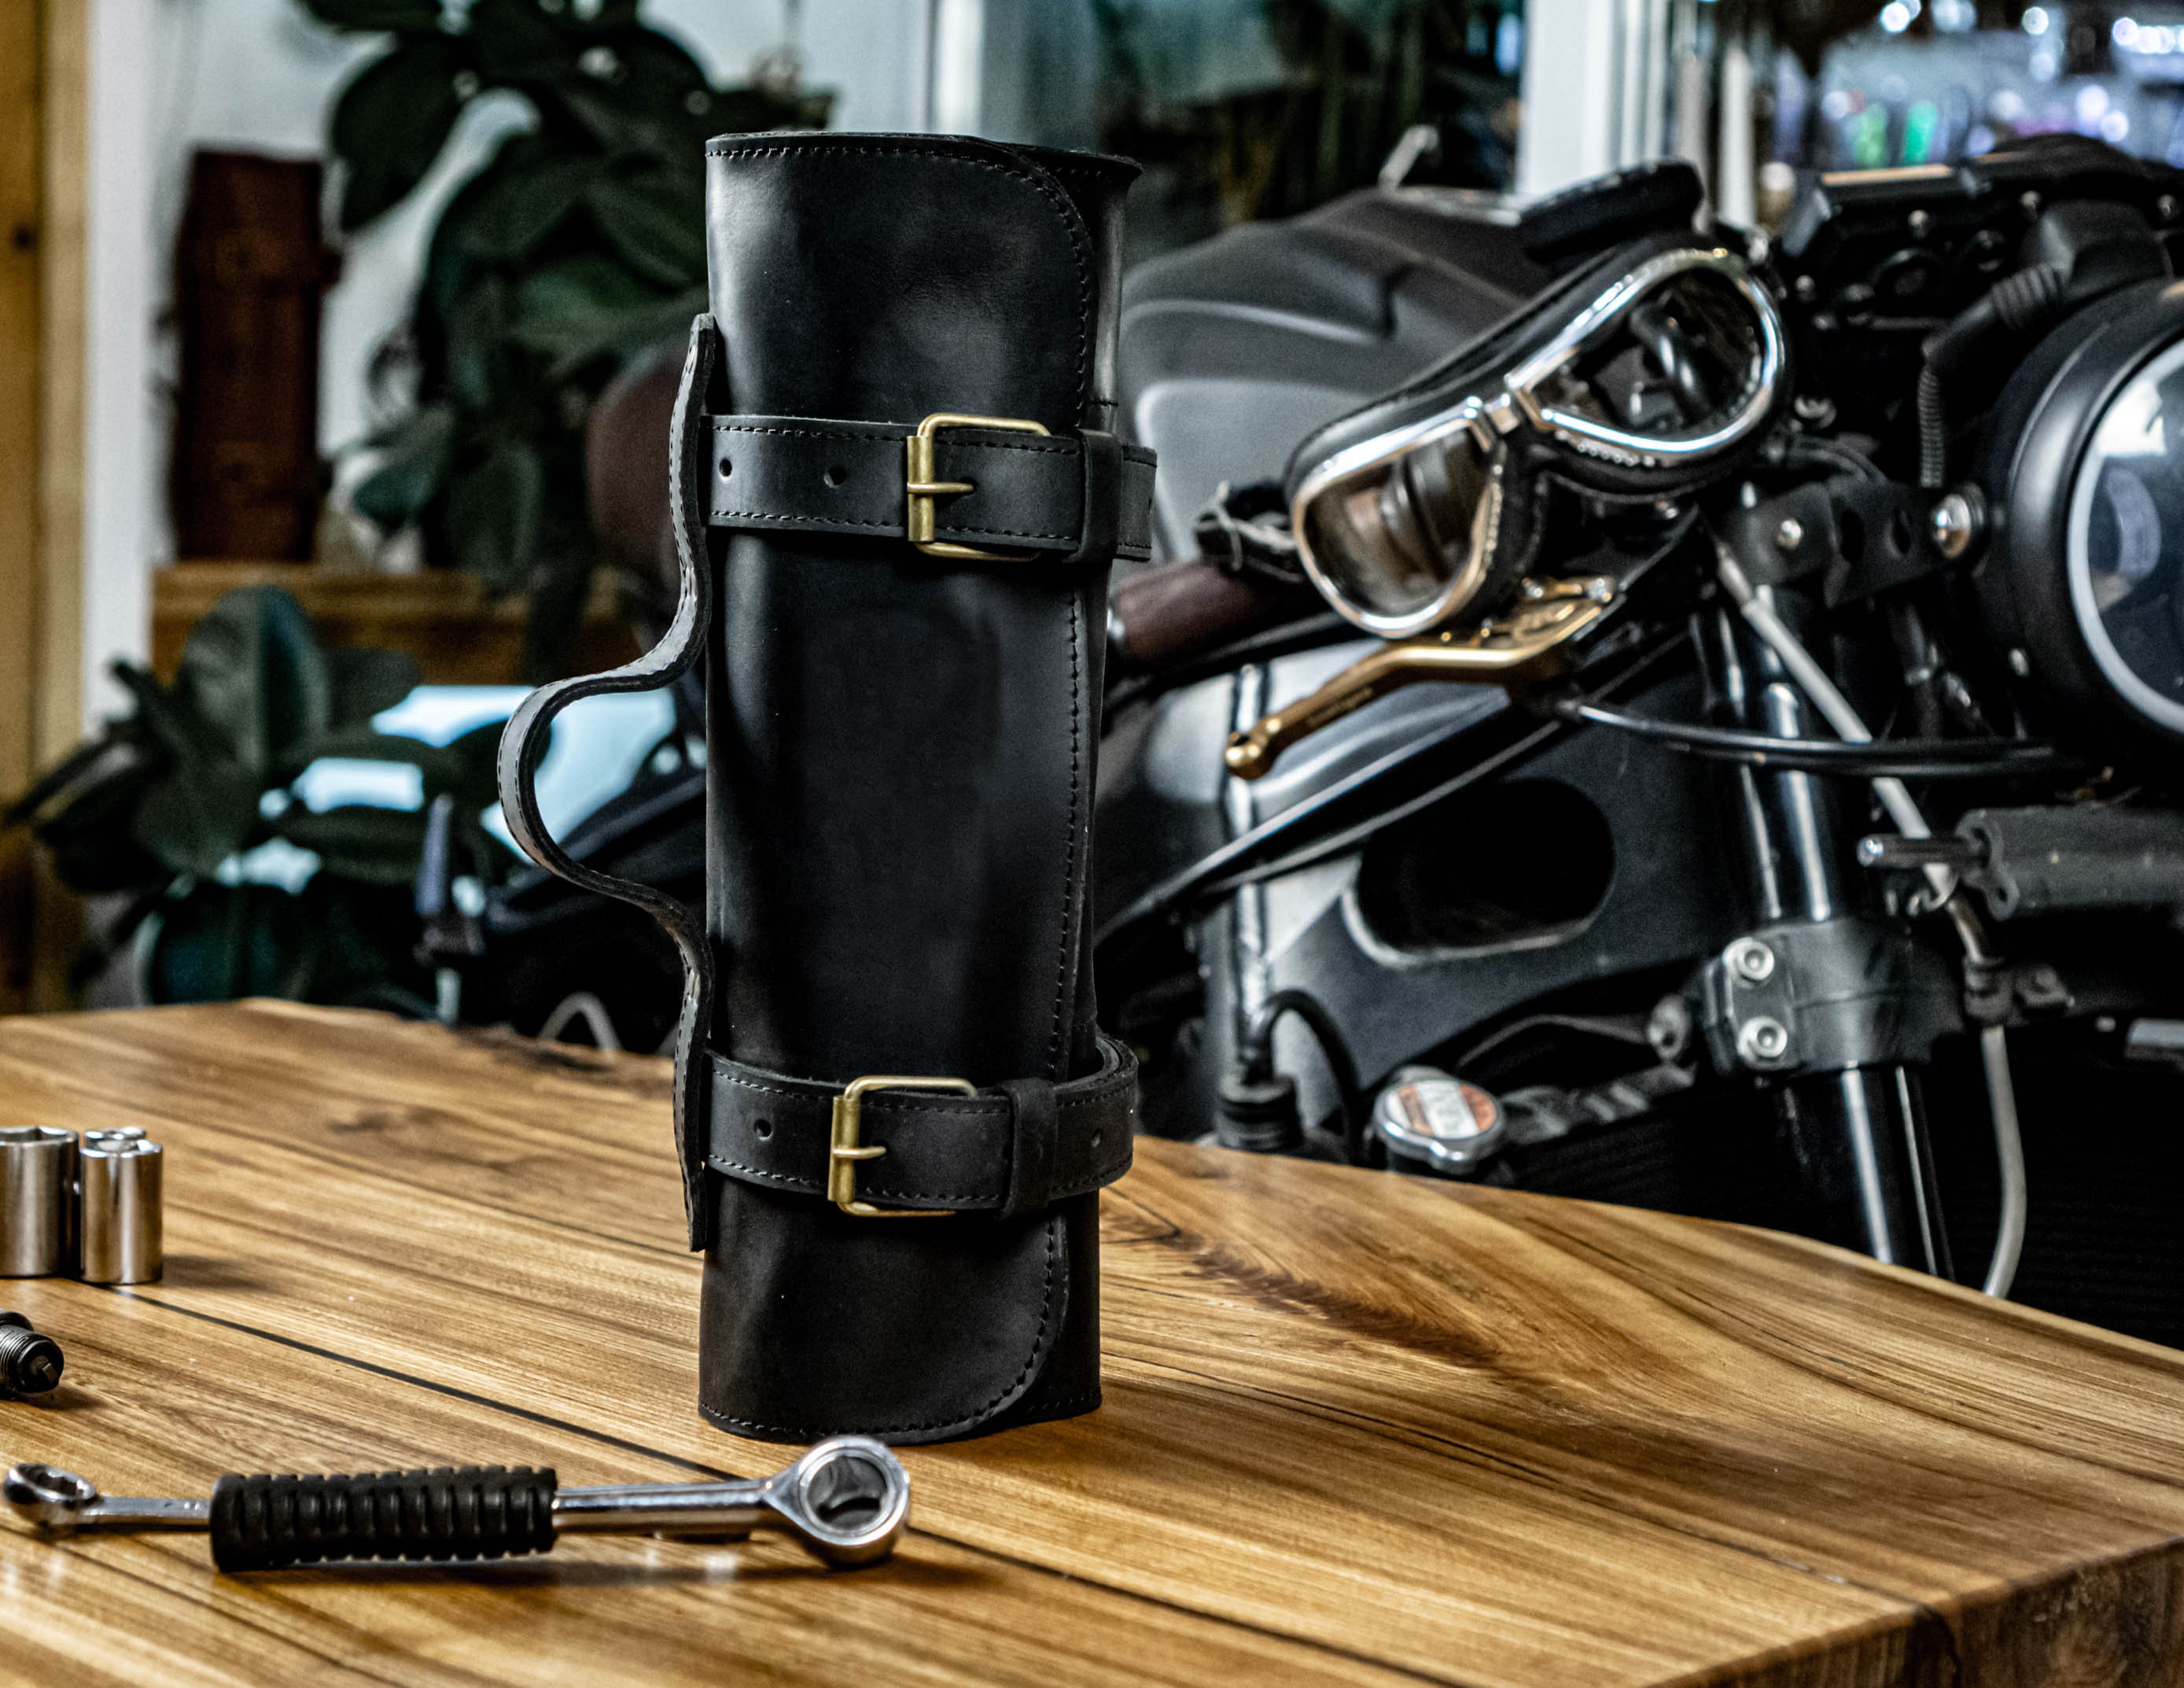 Hide & Ride, Motorcycle Tool Roll Bag, Motorbike Saddlebag, Wrench Organizer for Commuters, Storage Accessory Pouch, Full Grain Leather, Handmade